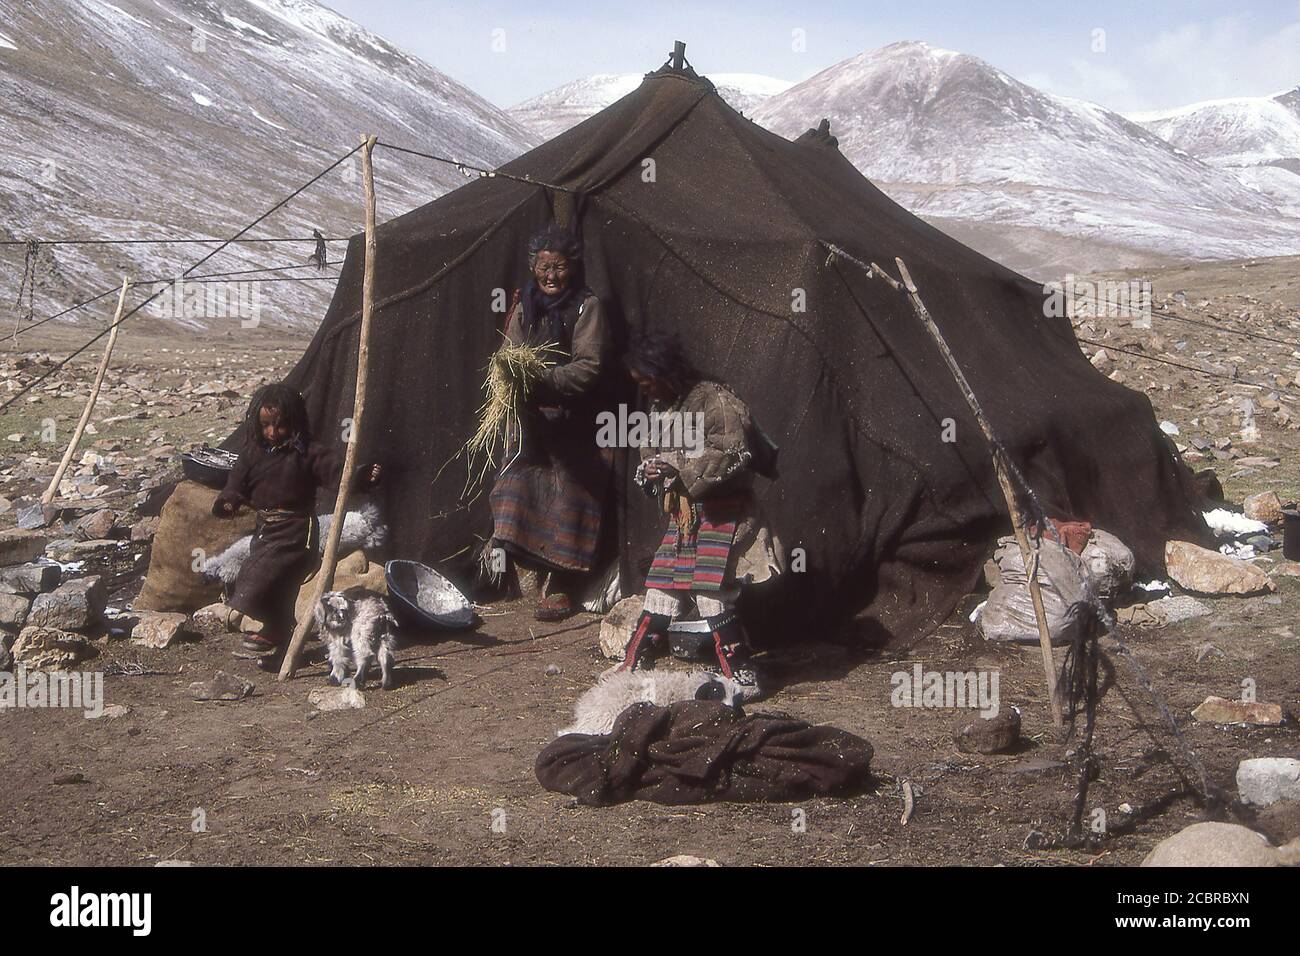 TIBET - NOMAD FAMILY AND THEIR TENT. Stock Photo